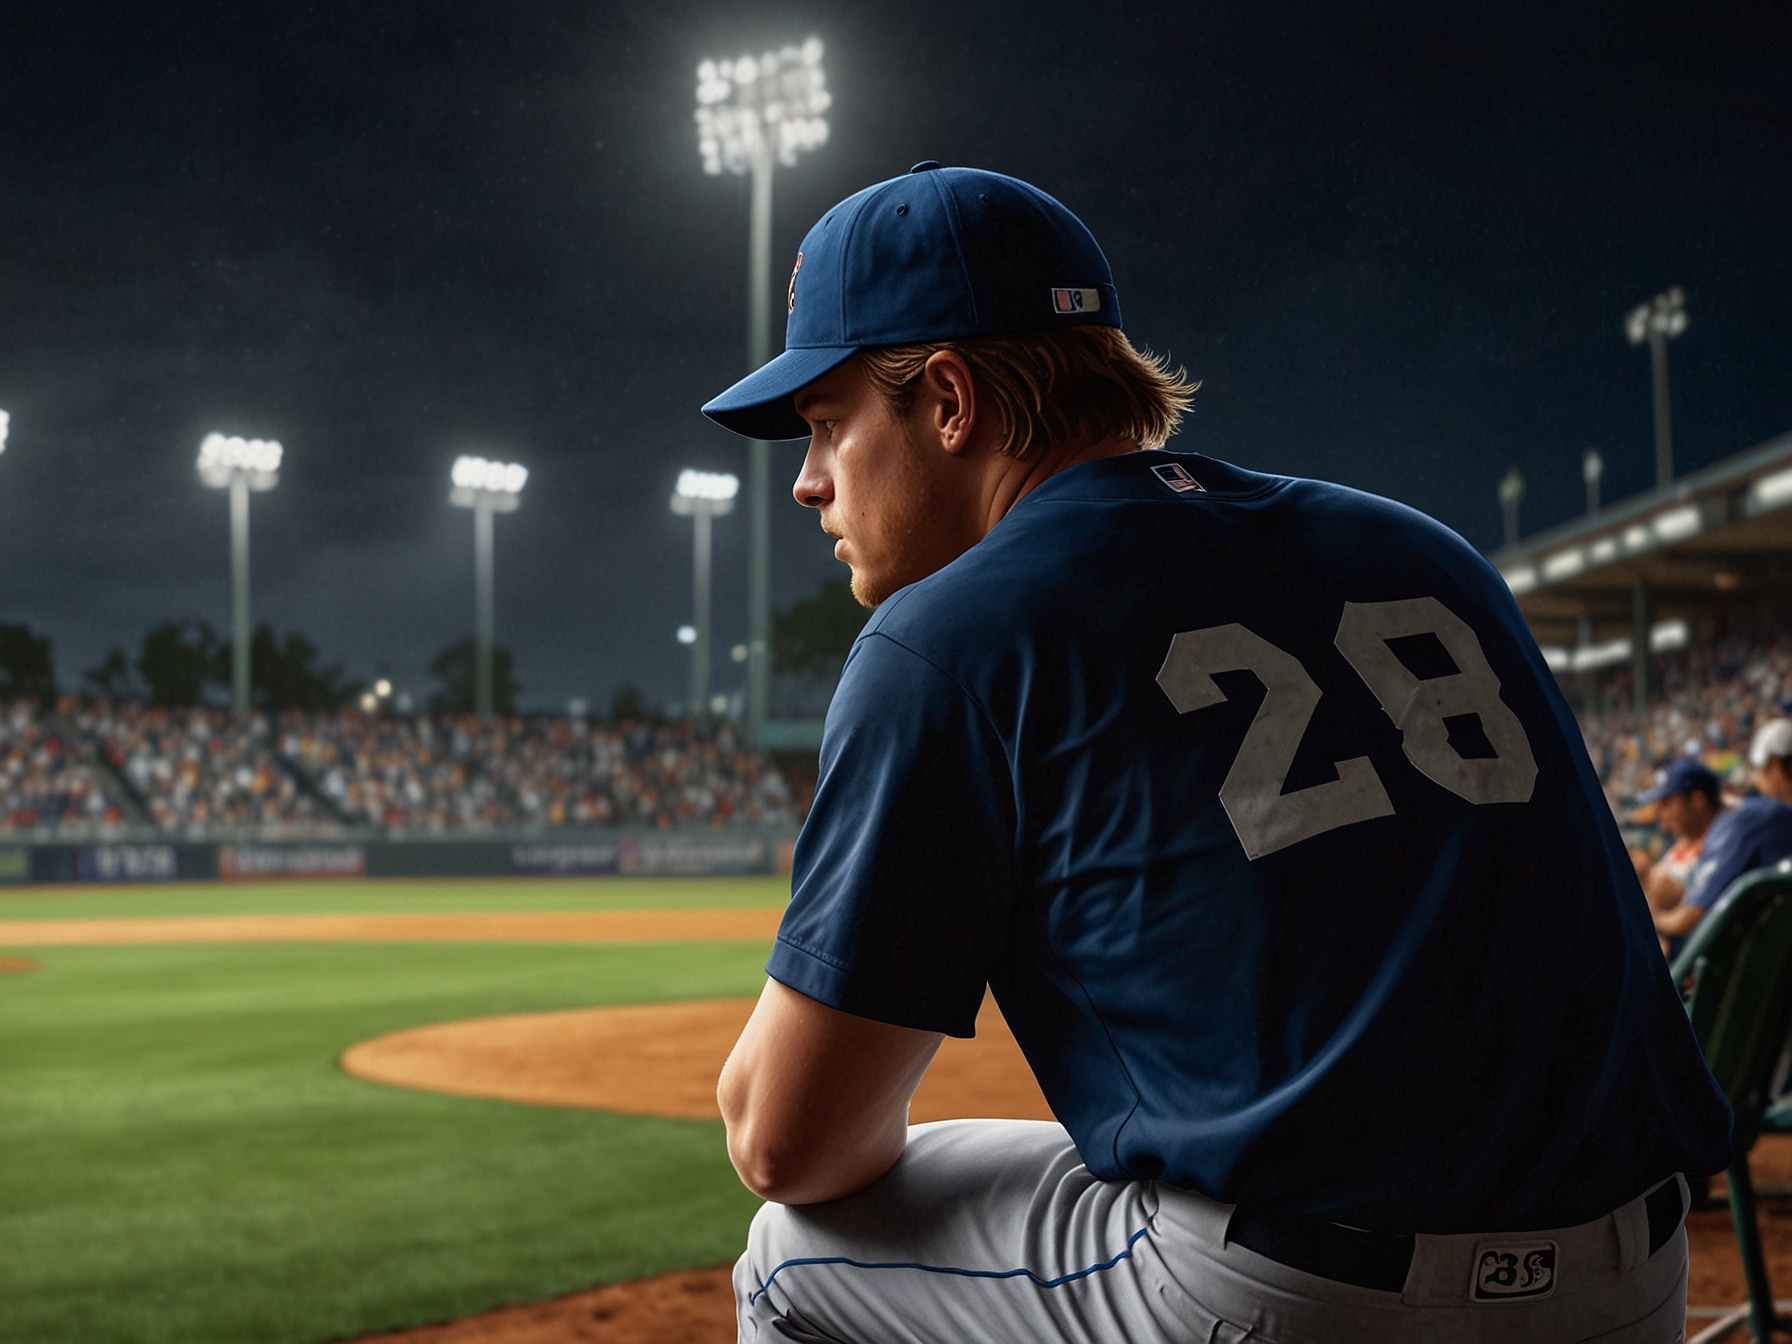 A poignant moment captured of Torkelson during a minor league game, reflecting on his journey. The stadium lights underscore the hopes pinned on his eventual return to MLB.